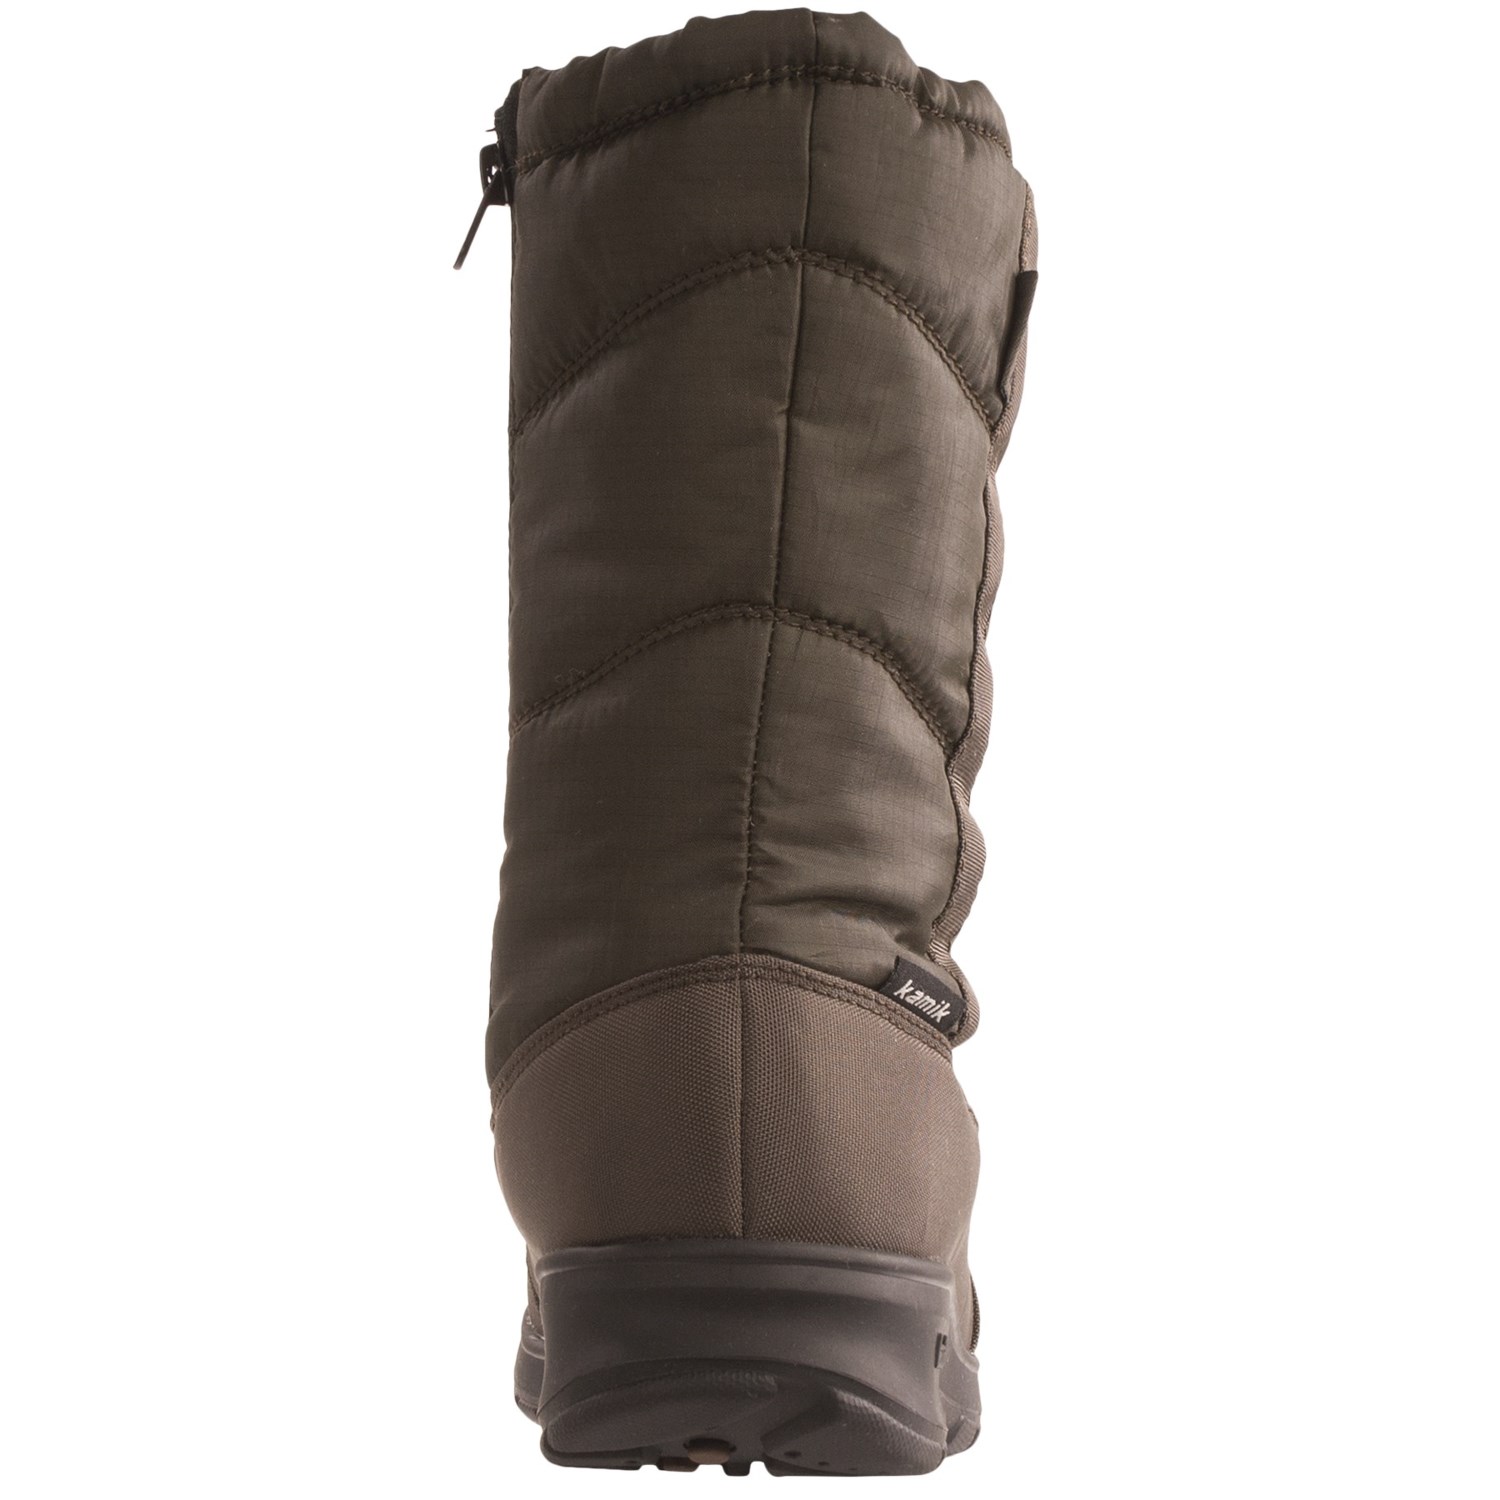 Womens Waterproof Snow Boots Clearance - Cr Boot